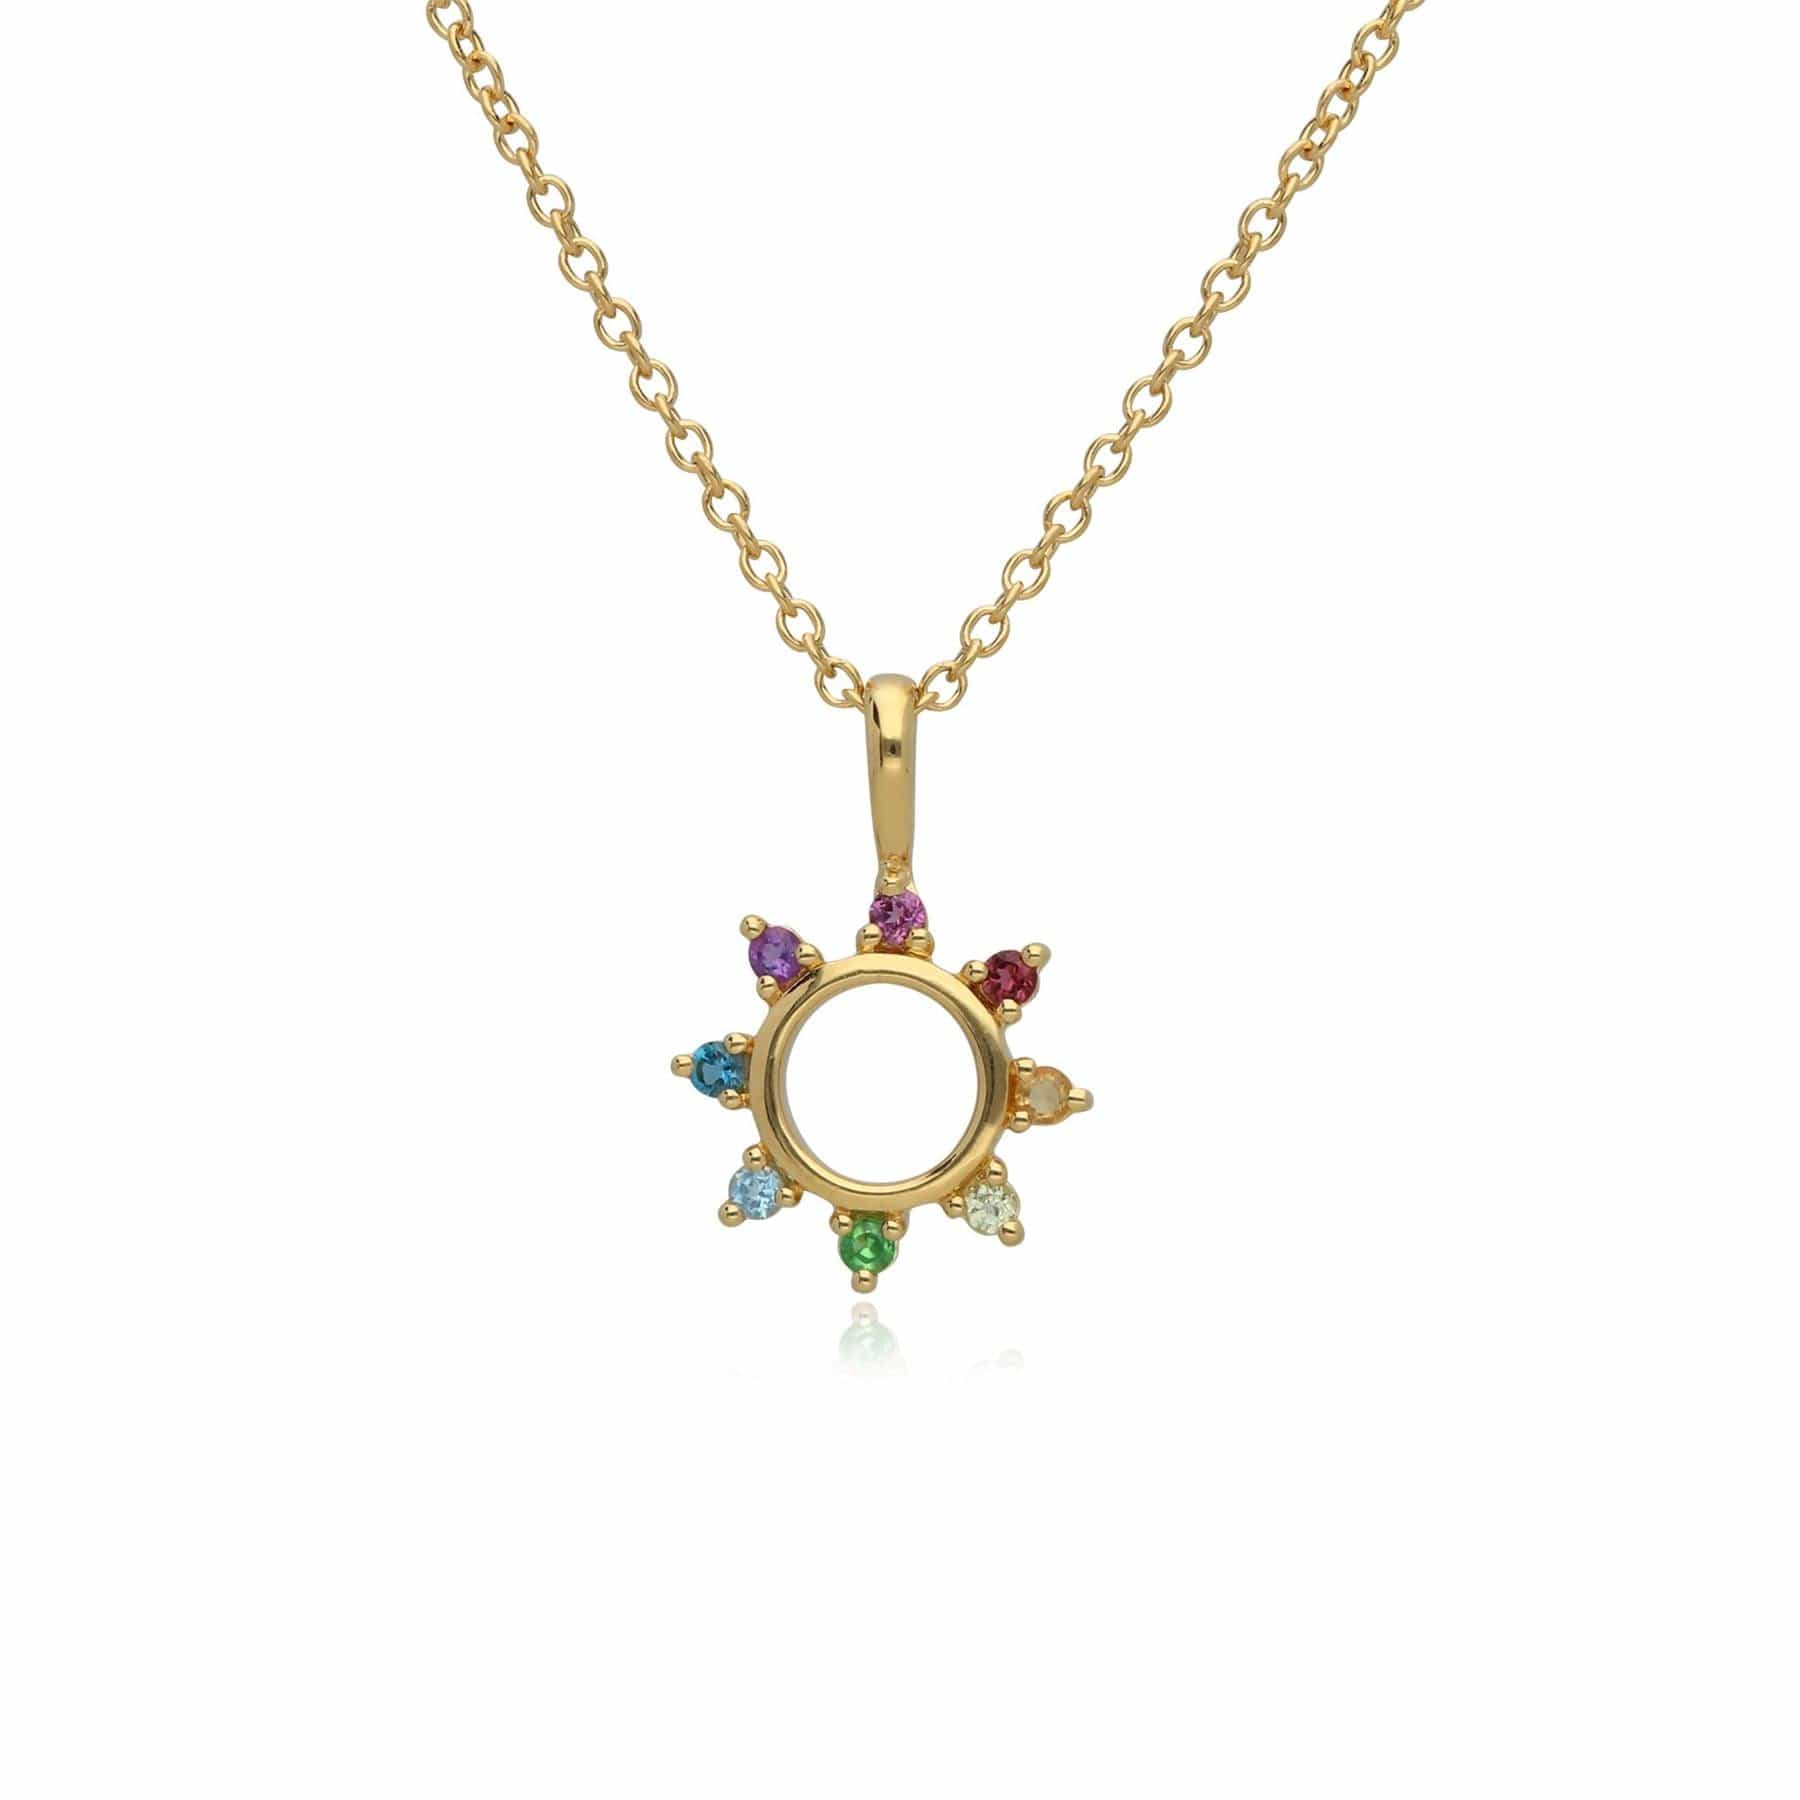 Rainbow Sunburst Necklace in Gold Plated Sterling Silver